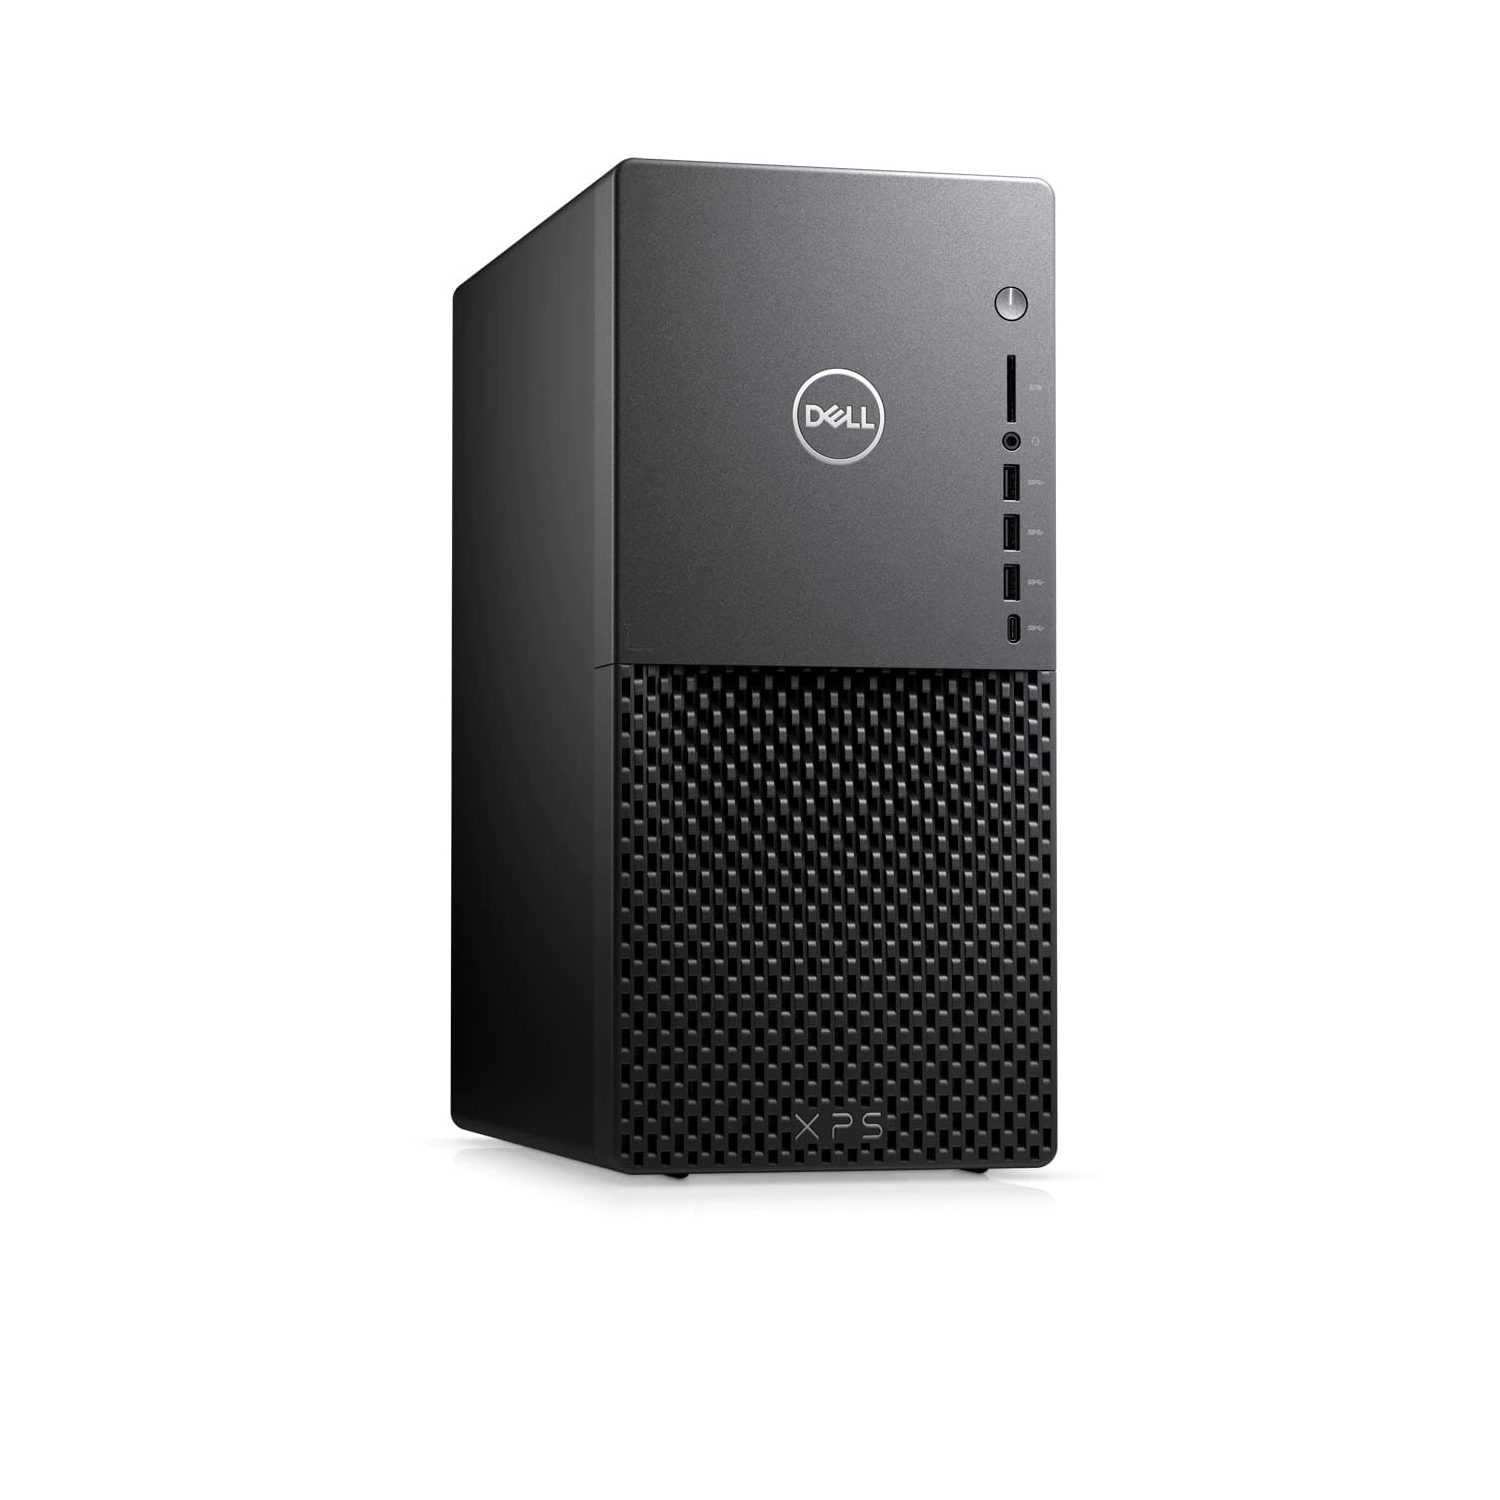 Refurbished (Excellent) - Dell XPS 8940 Desktop (2020) | Core i7 - 1TB SSD + 1TB HDD - 32GB RAM - RTX 3060 | 8 Cores @ 4.9 GHz - 11th Gen CPU Certified Refurbished